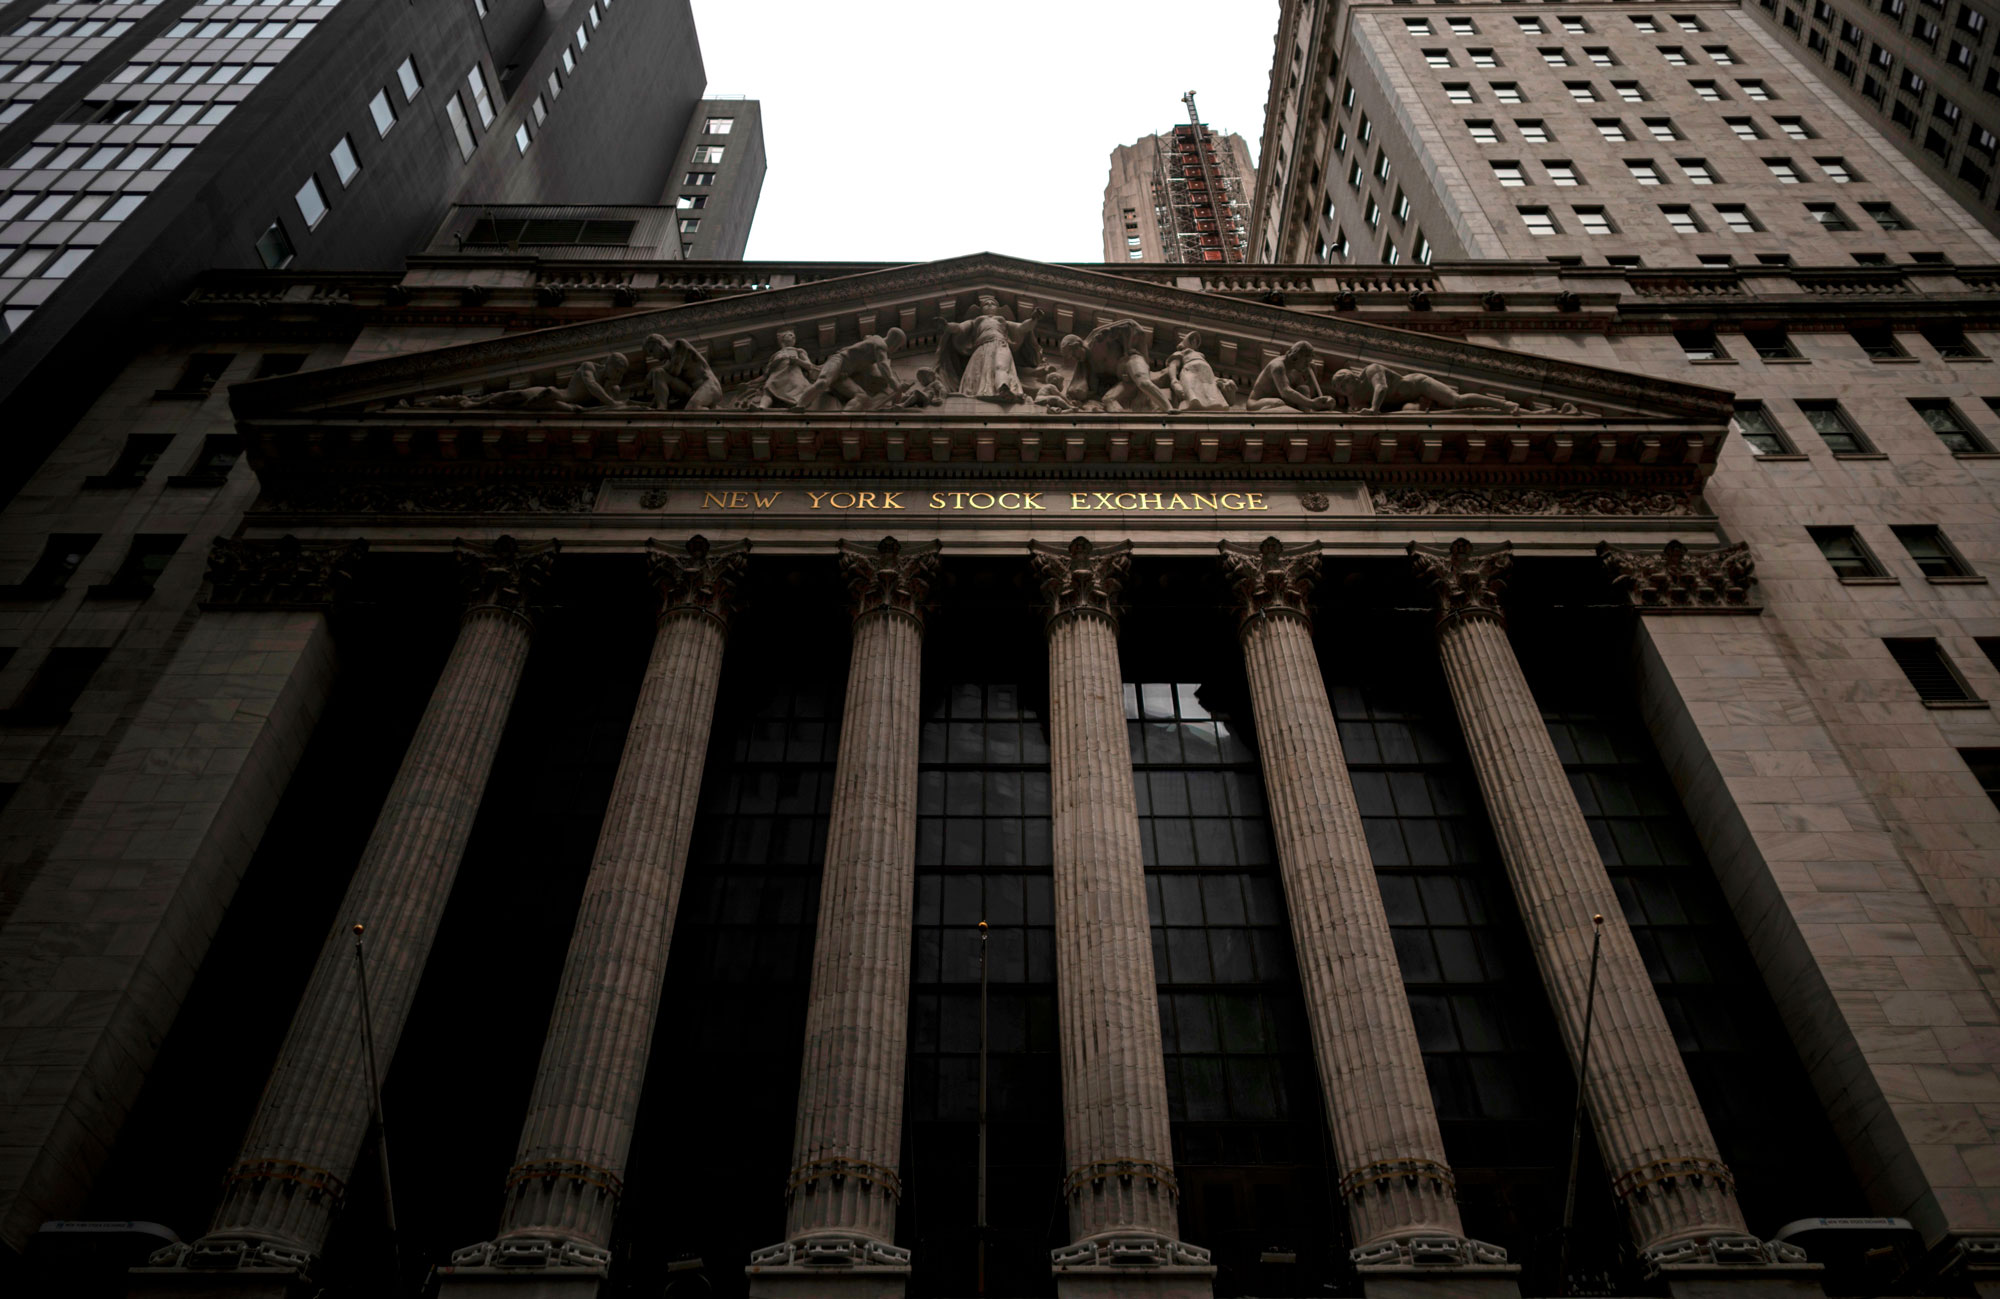 The New York Stock Exchange (NYSE) stands on May 8 in New York City.